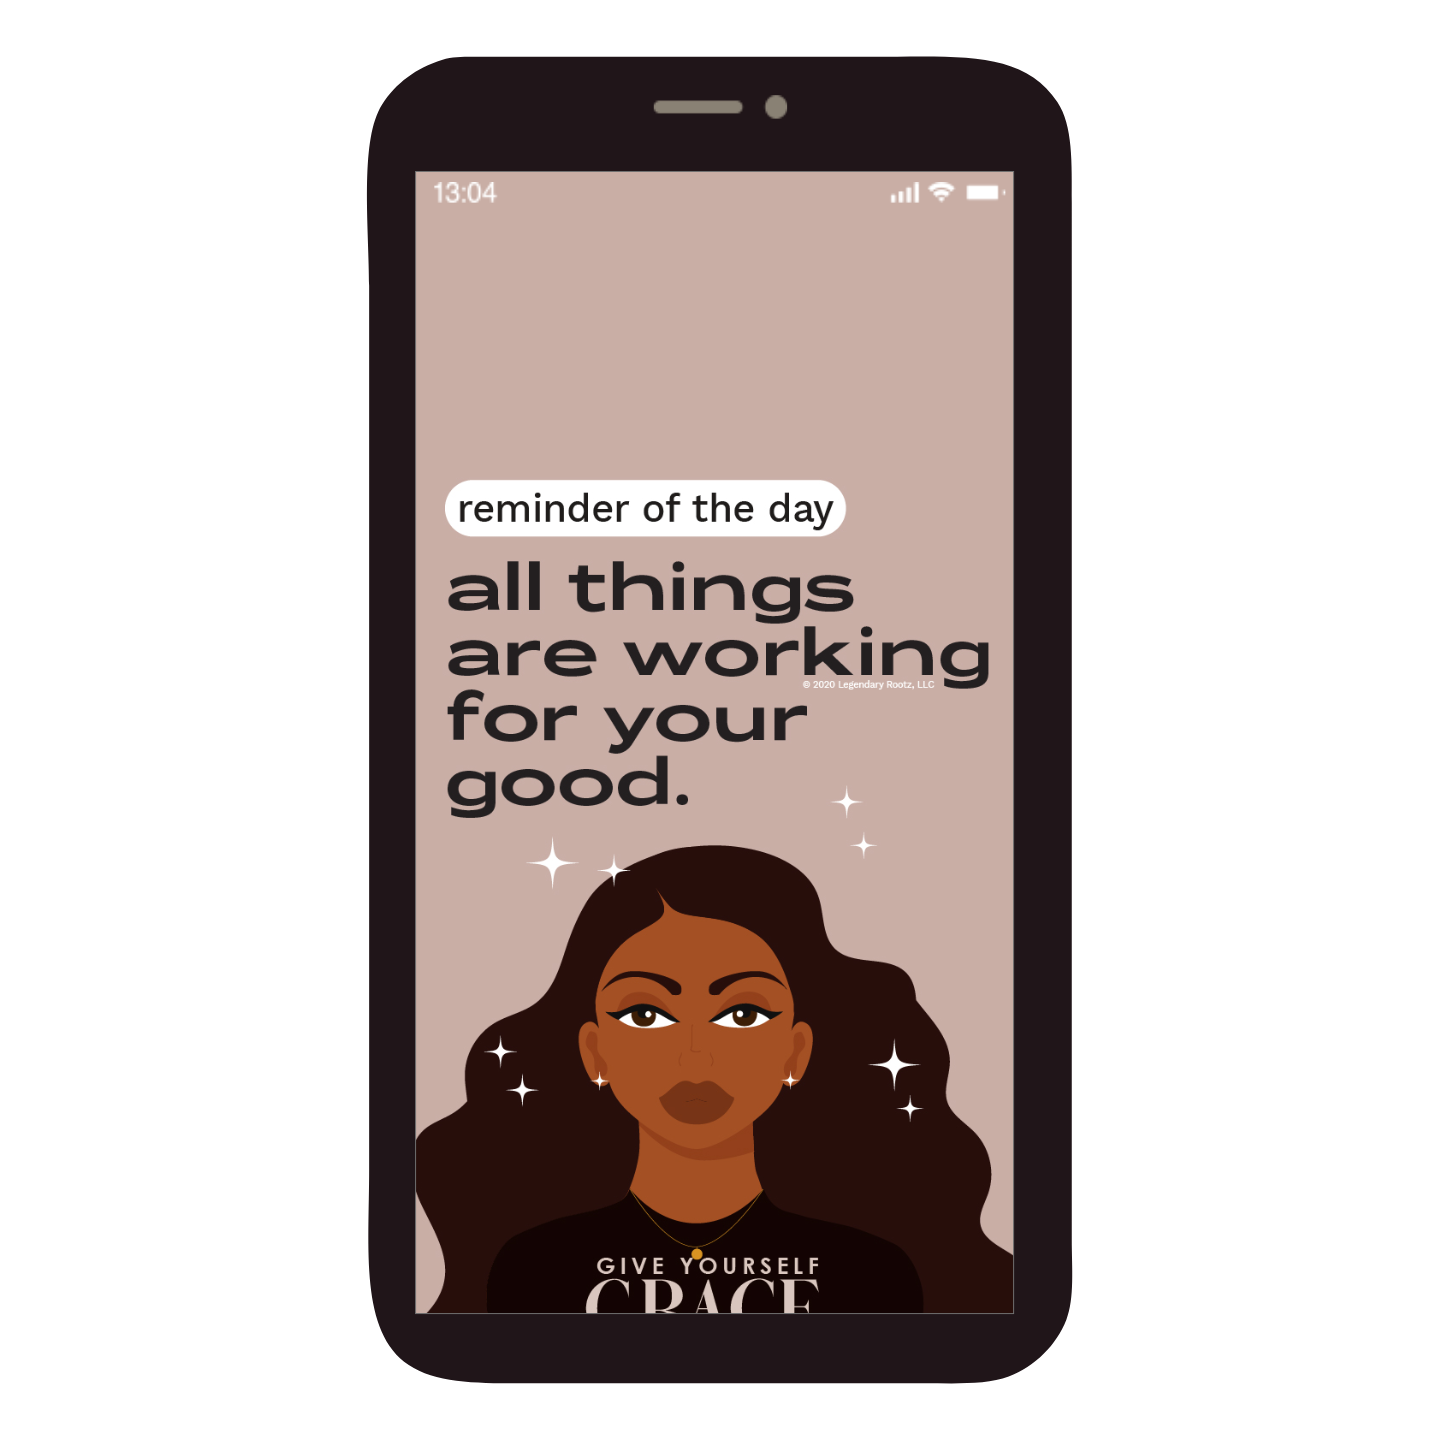 Reminder Of The Day: All Things Are Working | Wallpaper Pack